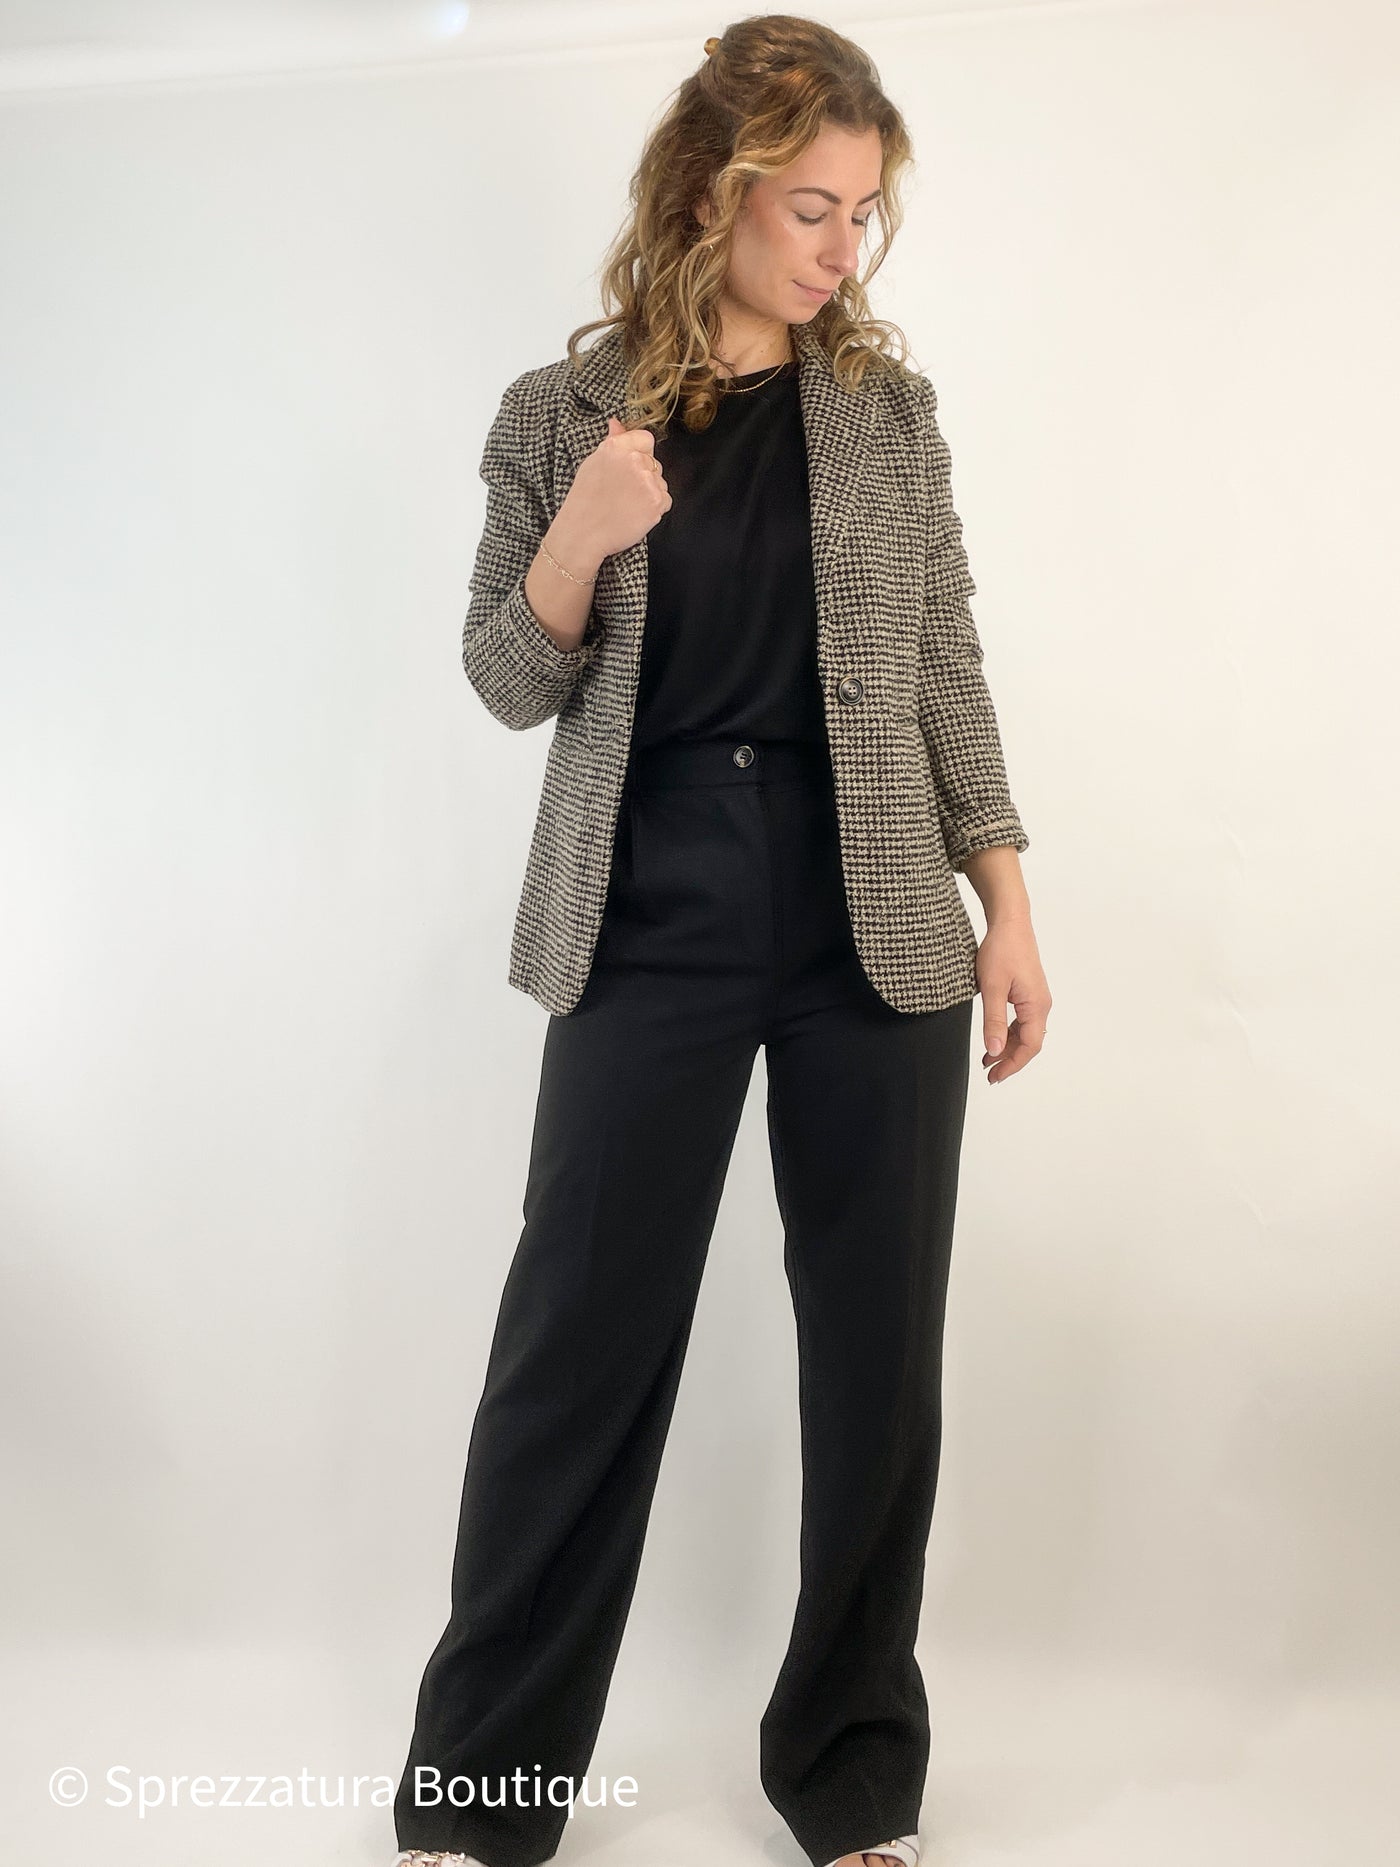 womens tweed neutral blazer brown black chic classic Modern smart causal female chic effortless outfit womens ladies gift elegant effortless clothing everyday stylish clothes apparel outfits chic winter fall autumn professional style women’s boutique trendy teacher office cute outfit boutique clothes fashion quality work from home neutral wardrobe essential basics lounge athleisure gift for her